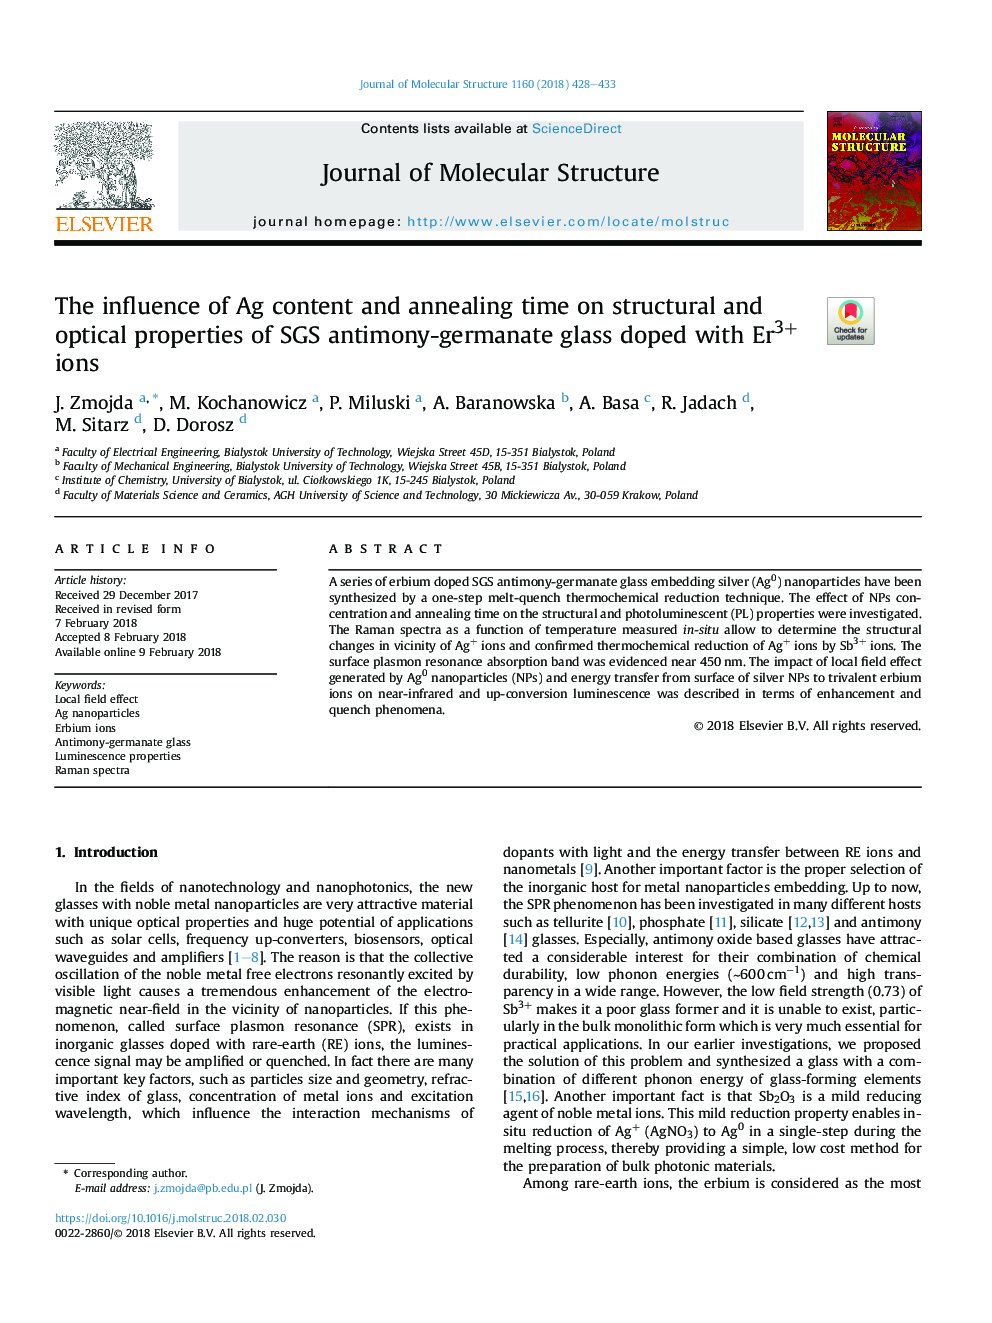 The influence of Ag content and annealing time on structural and optical properties of SGS antimony-germanate glass doped with Er3+ ions